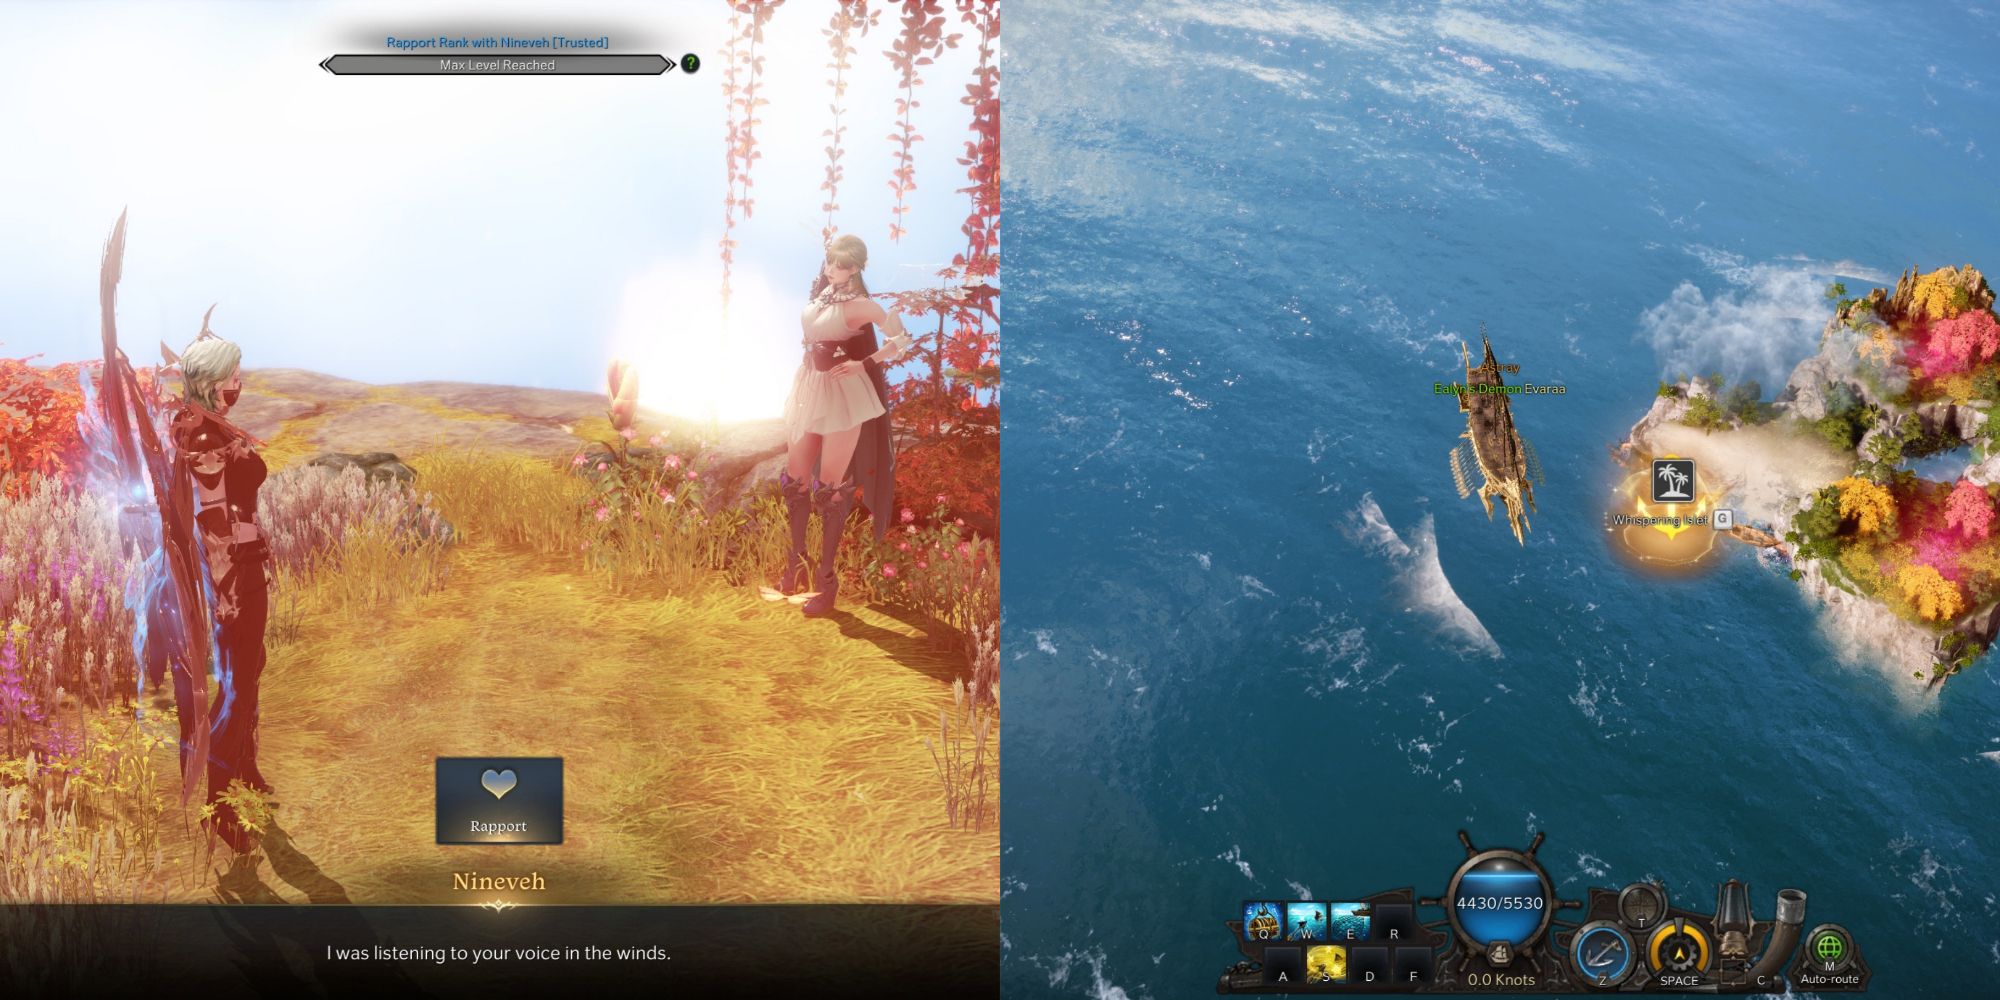 Lost Ark split image of Whispering Islet location on open seas and Nineveh Rapport